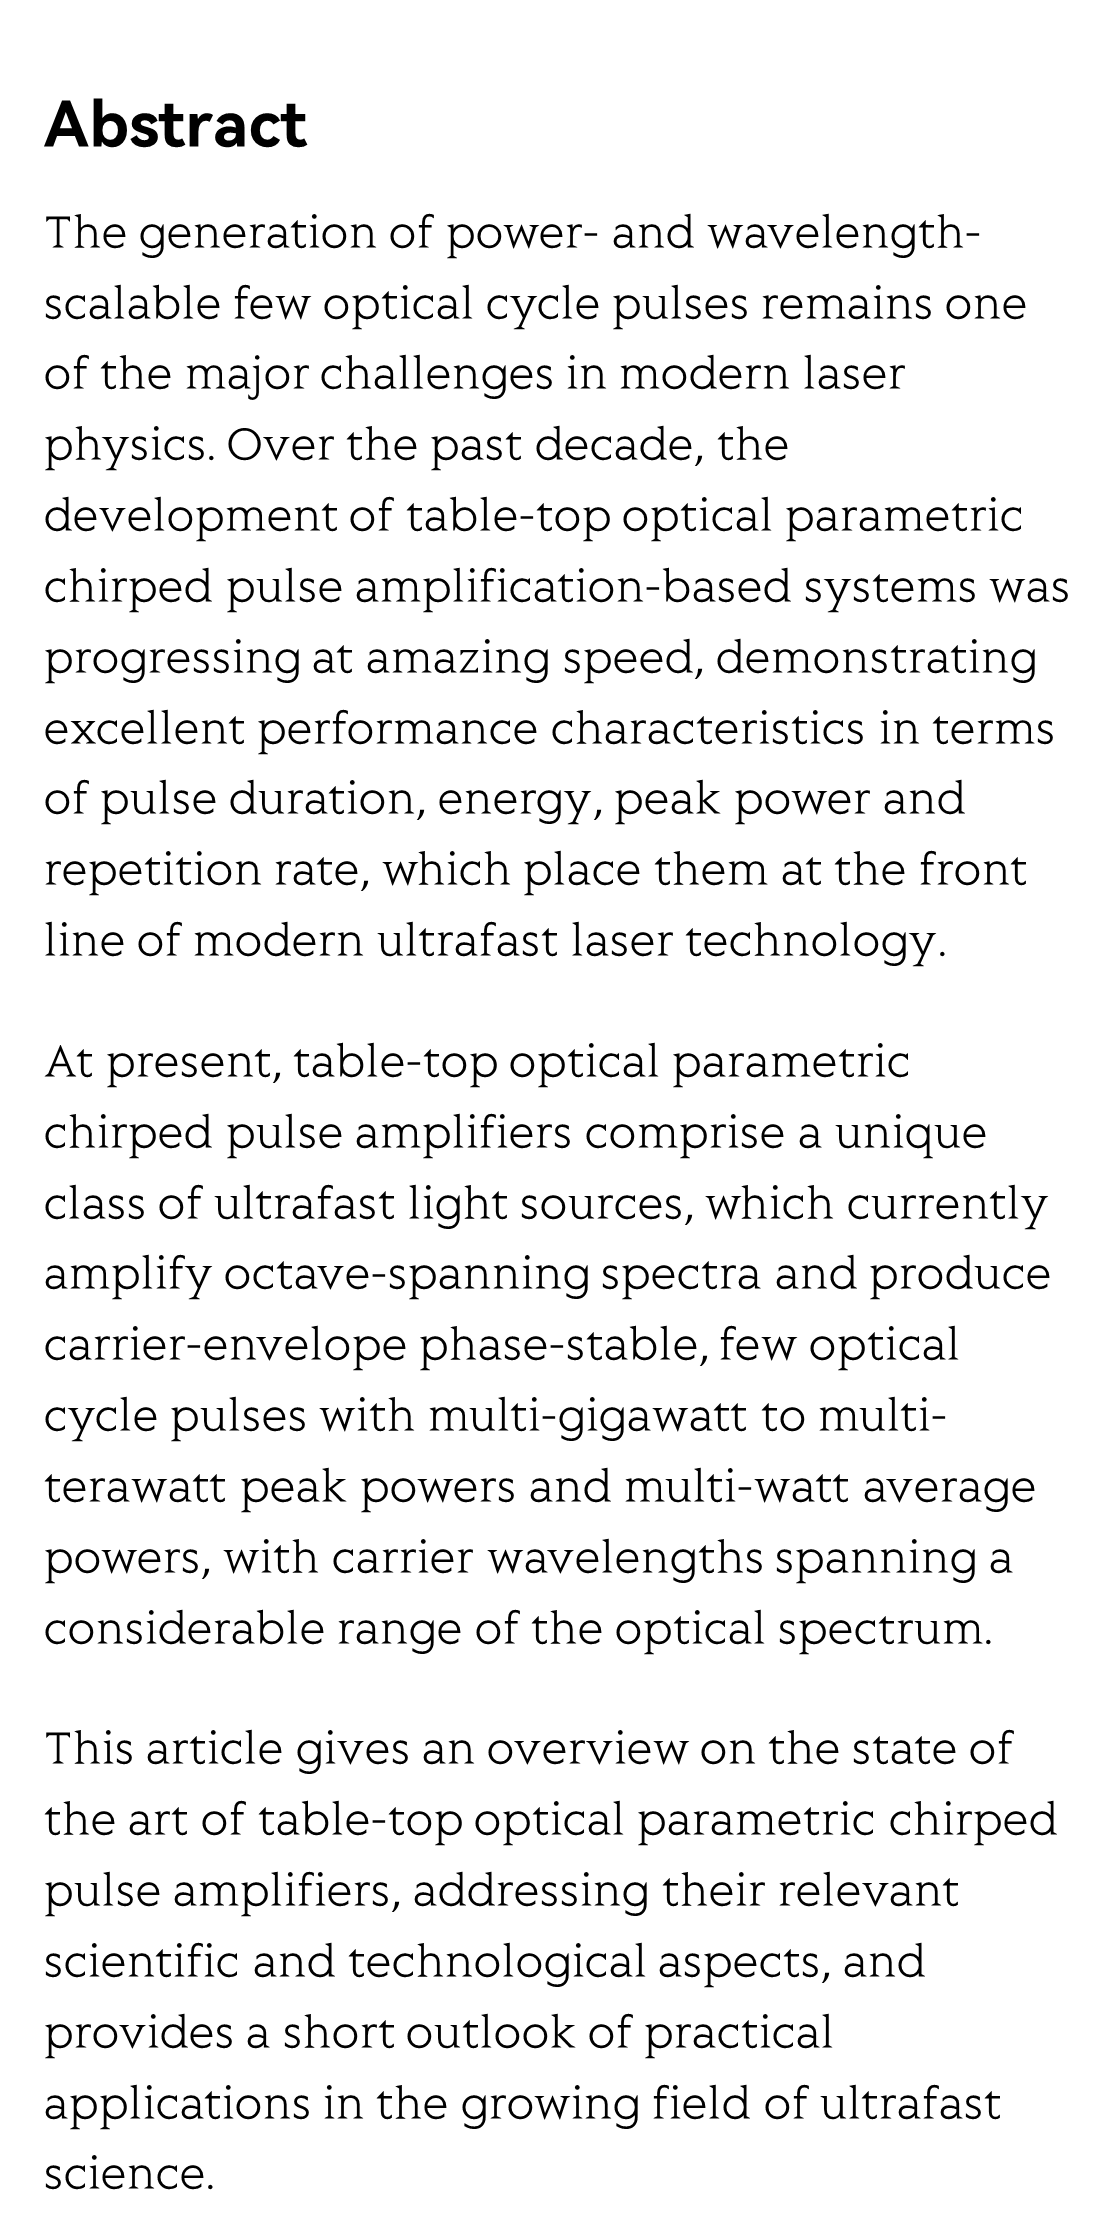 Table-top optical parametric chirped pulse amplifiers: past and present_2